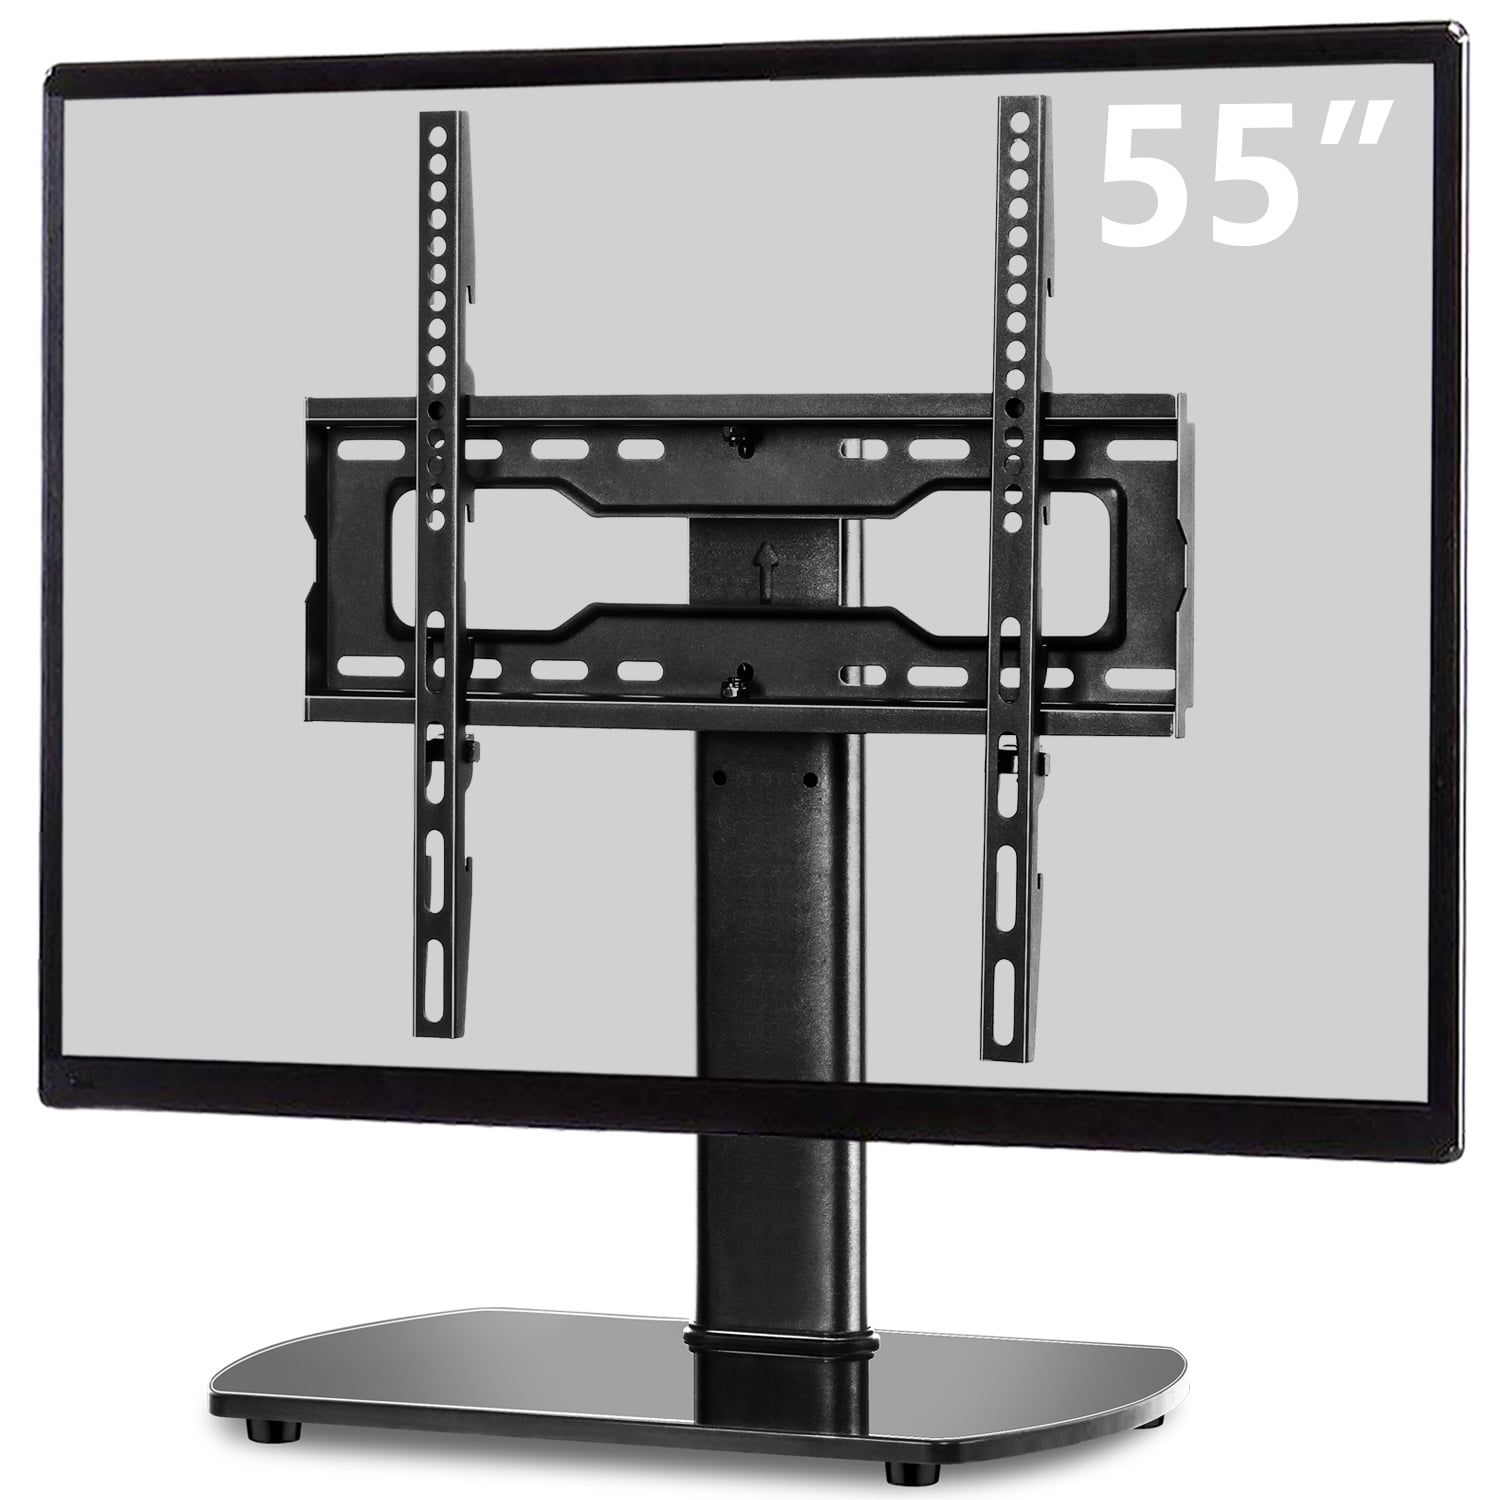 5rcom Universal Table Top Tv Stand Base With Swivel Mount For Tvs Up To With Universal Tabletop Tv Stands (View 19 of 20)